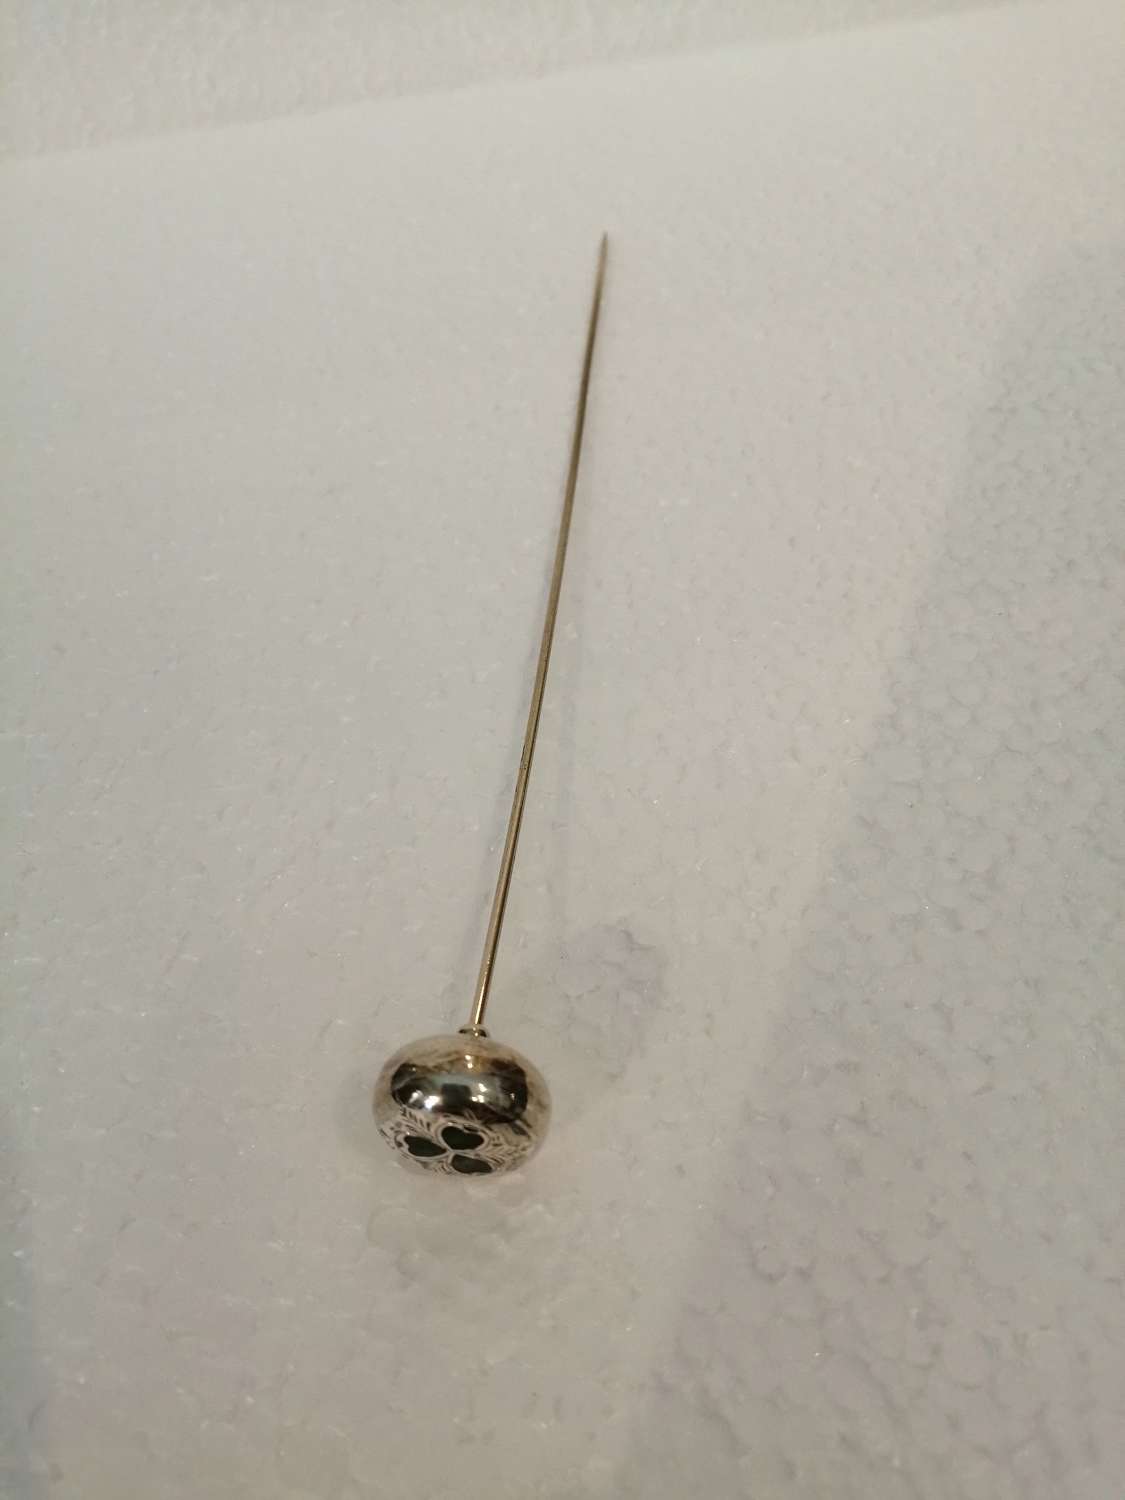 Silver hatpin with inset Connemara marble